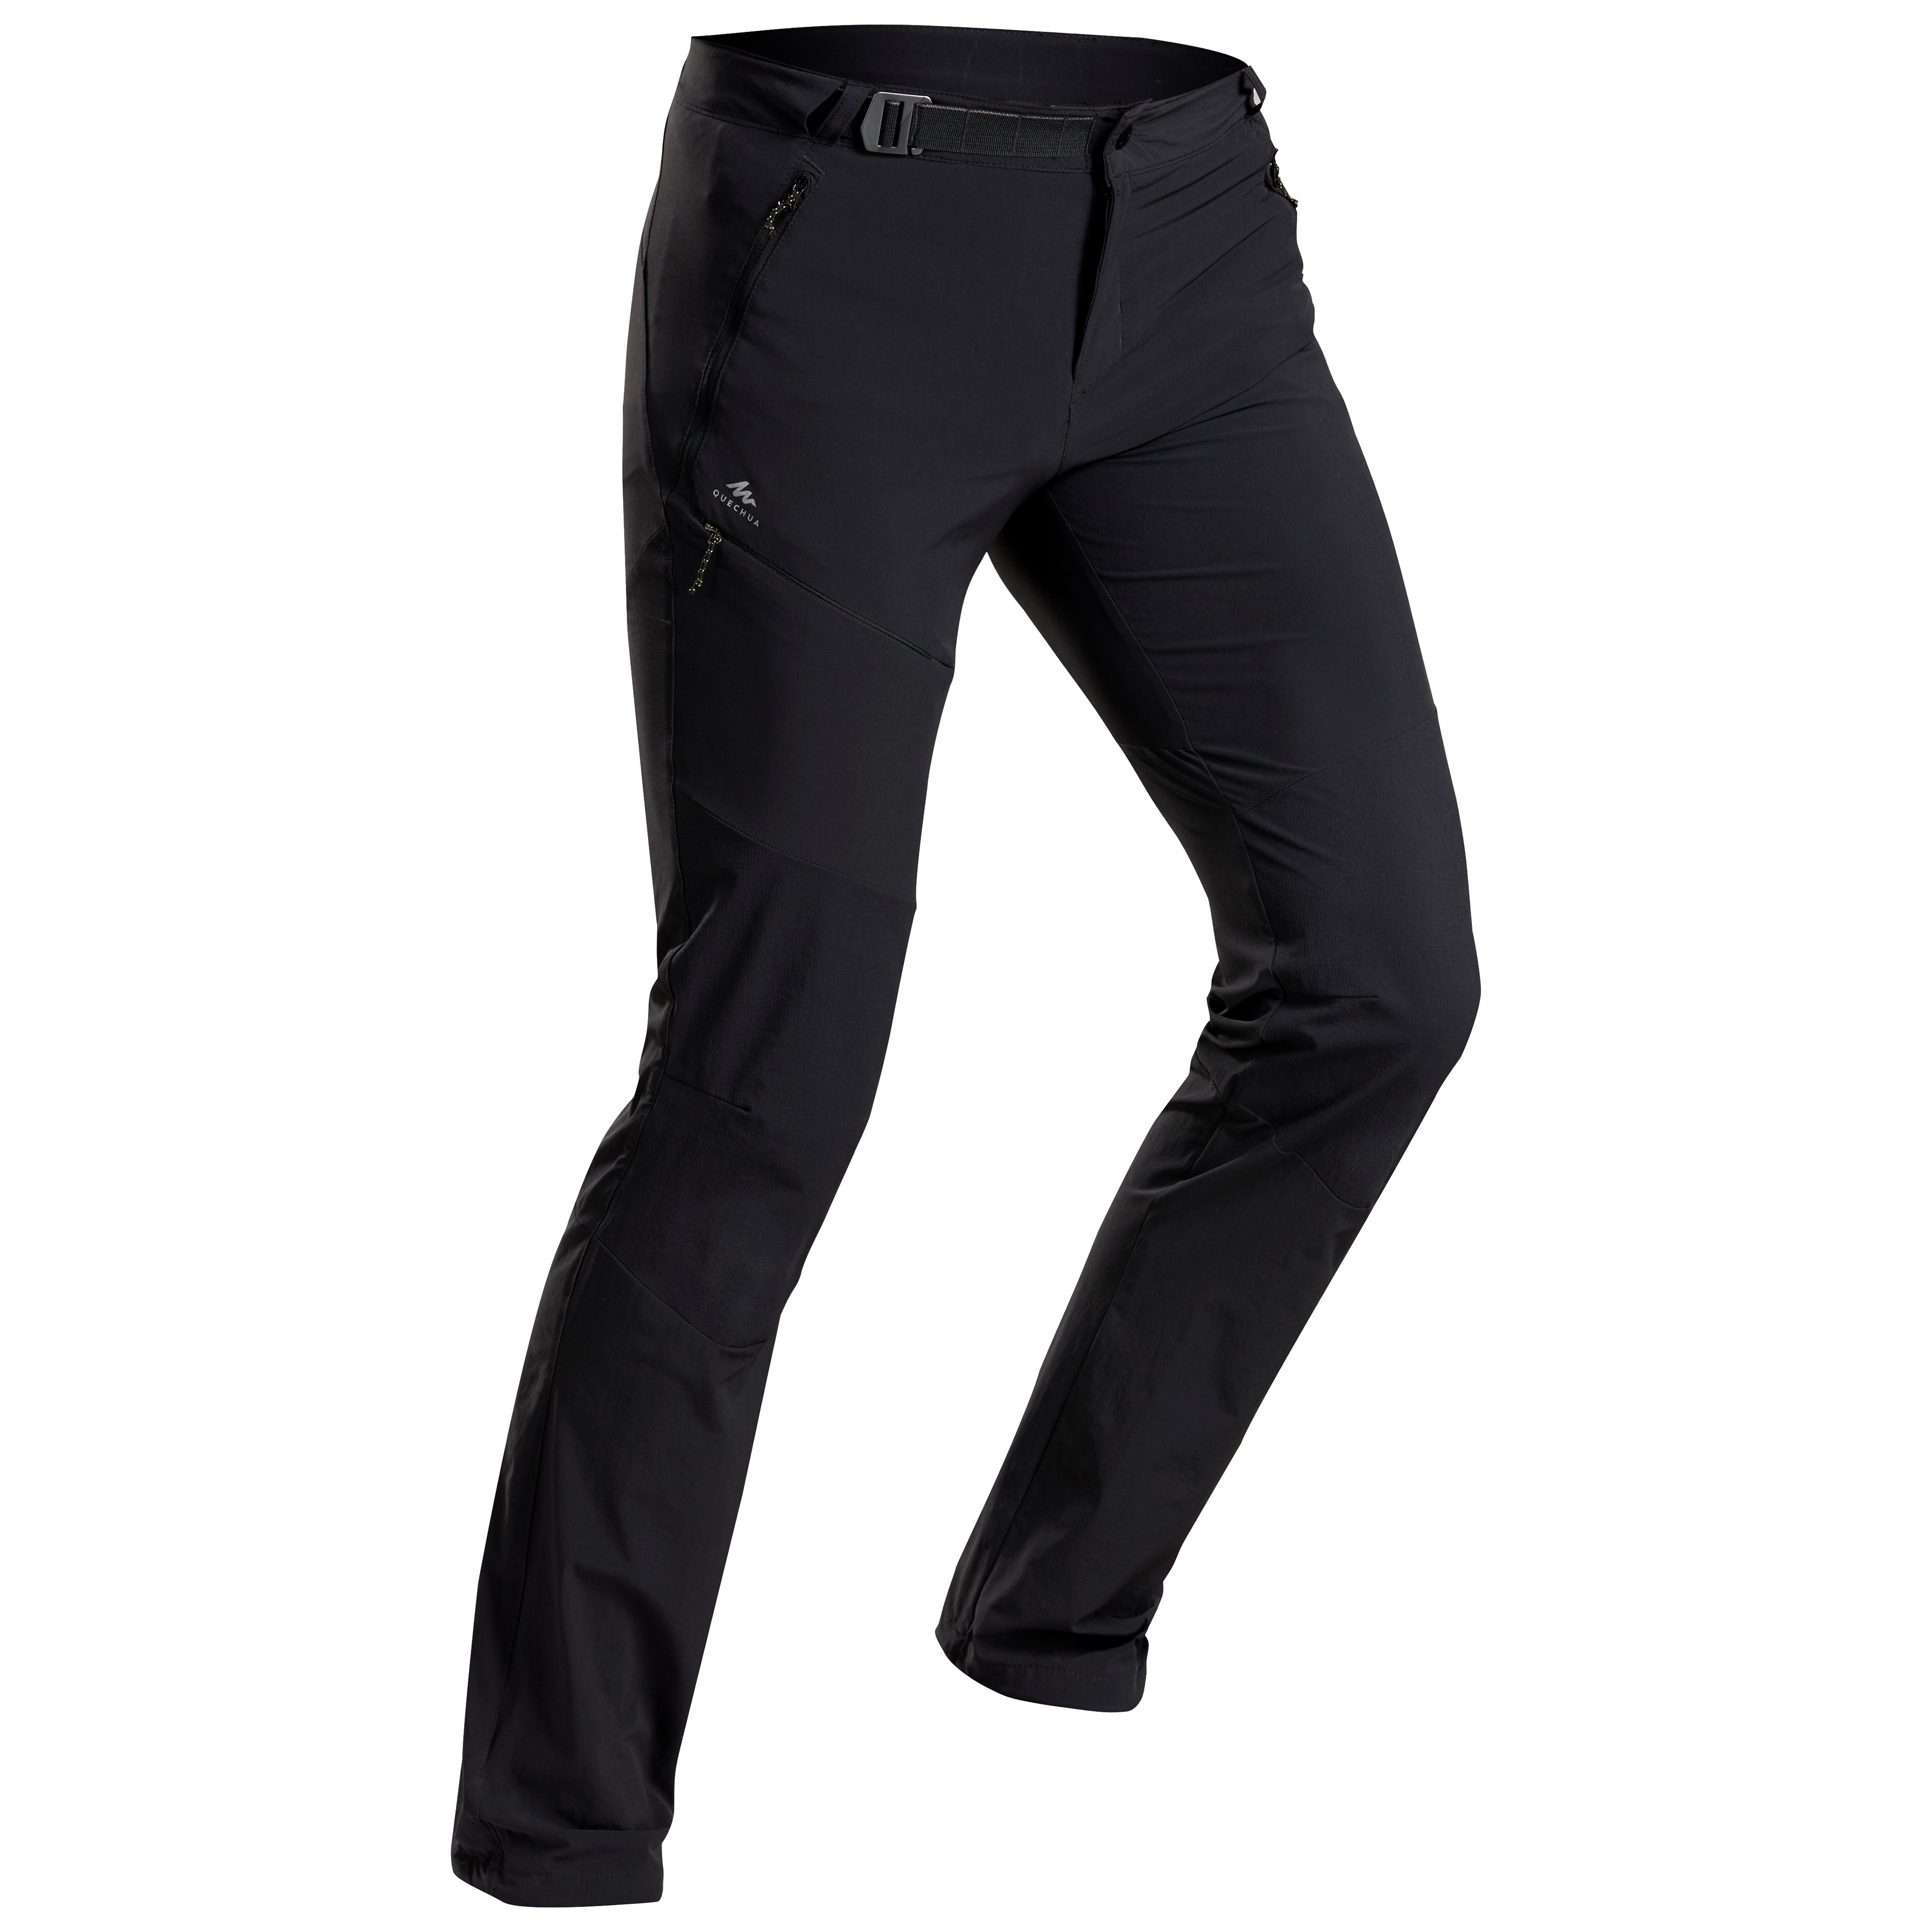 QUECHUA by Decathlon Regular Fit Men Black Trousers - Price History